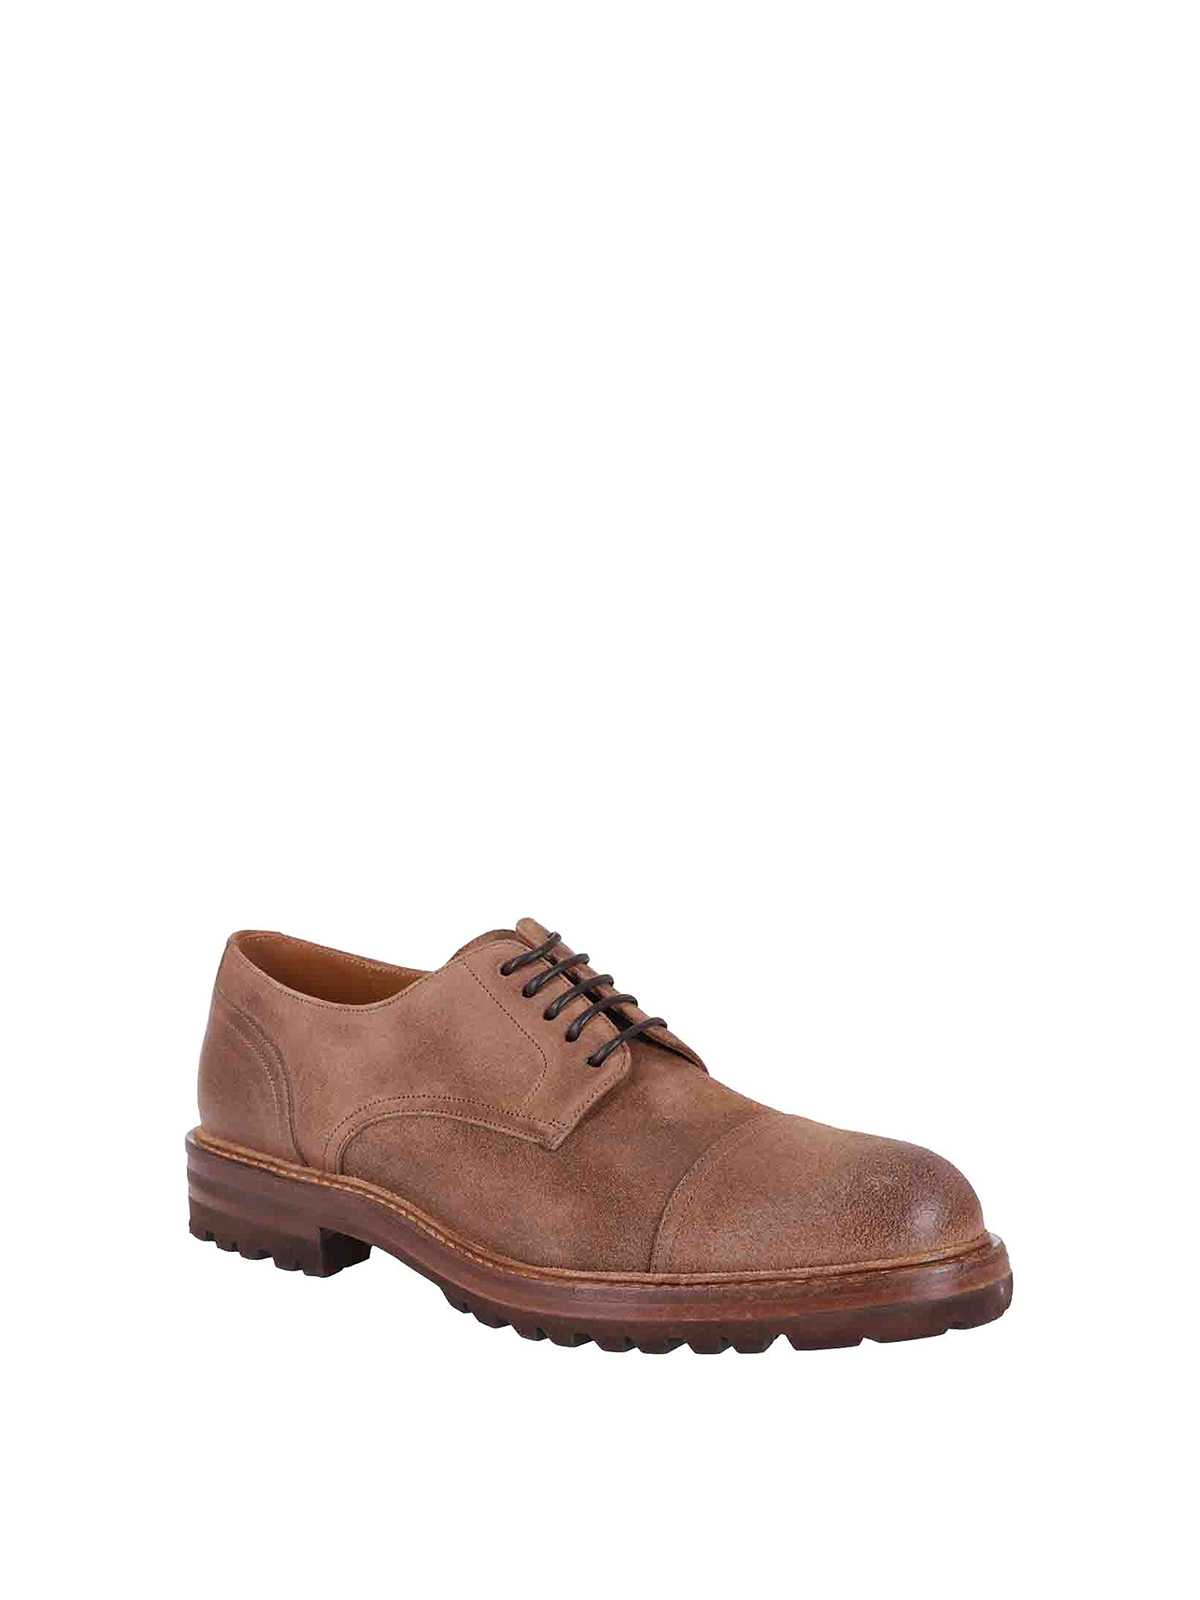 for Men Mens Shoes Lace-ups Brogues Brunello Cucinelli Suede Brogues in Copper Brown 